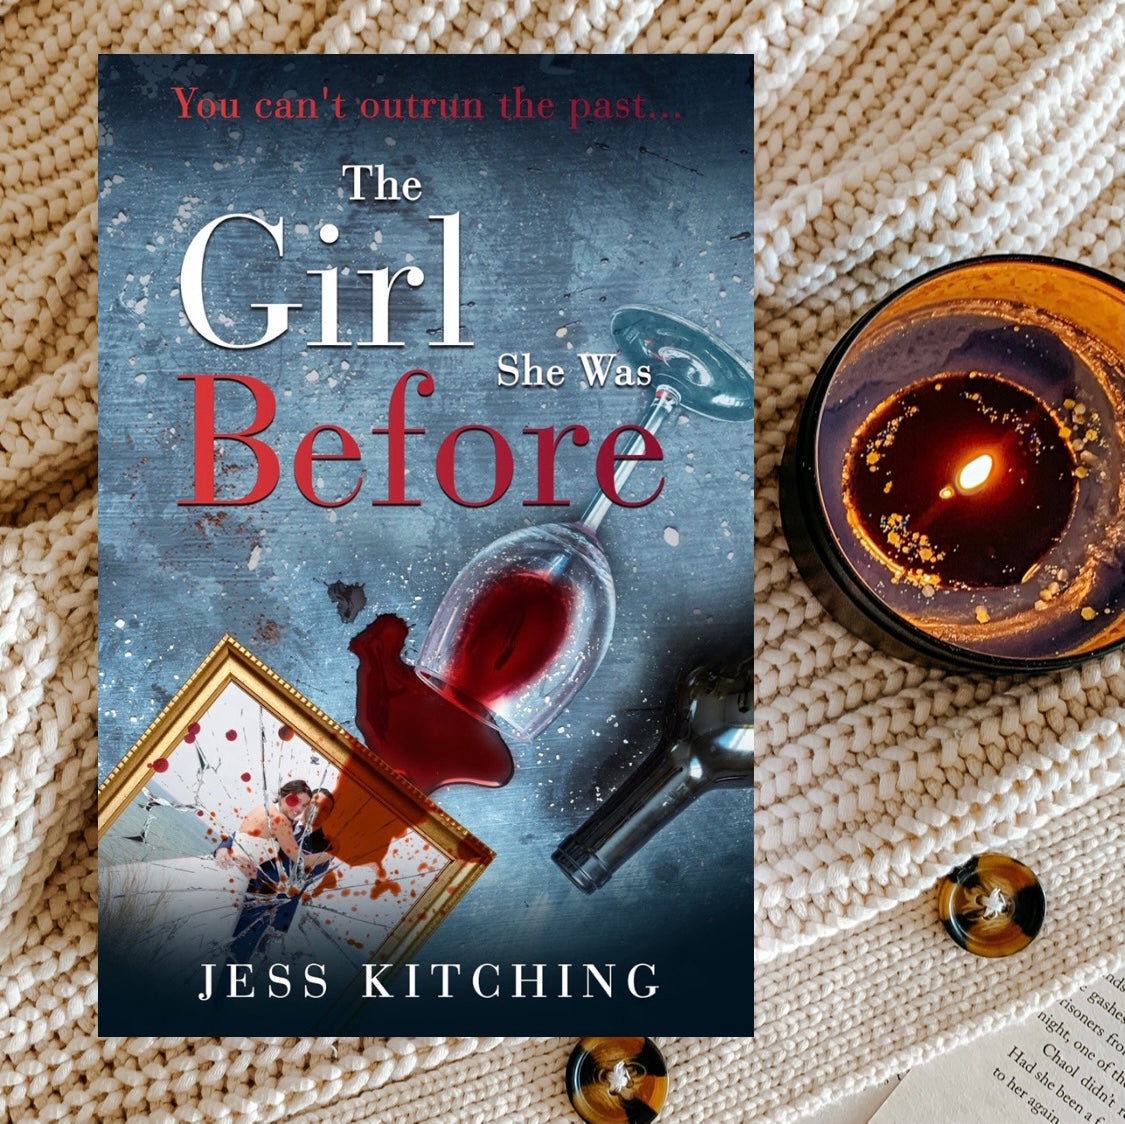 The Girl She Was Before by Jess Kitching